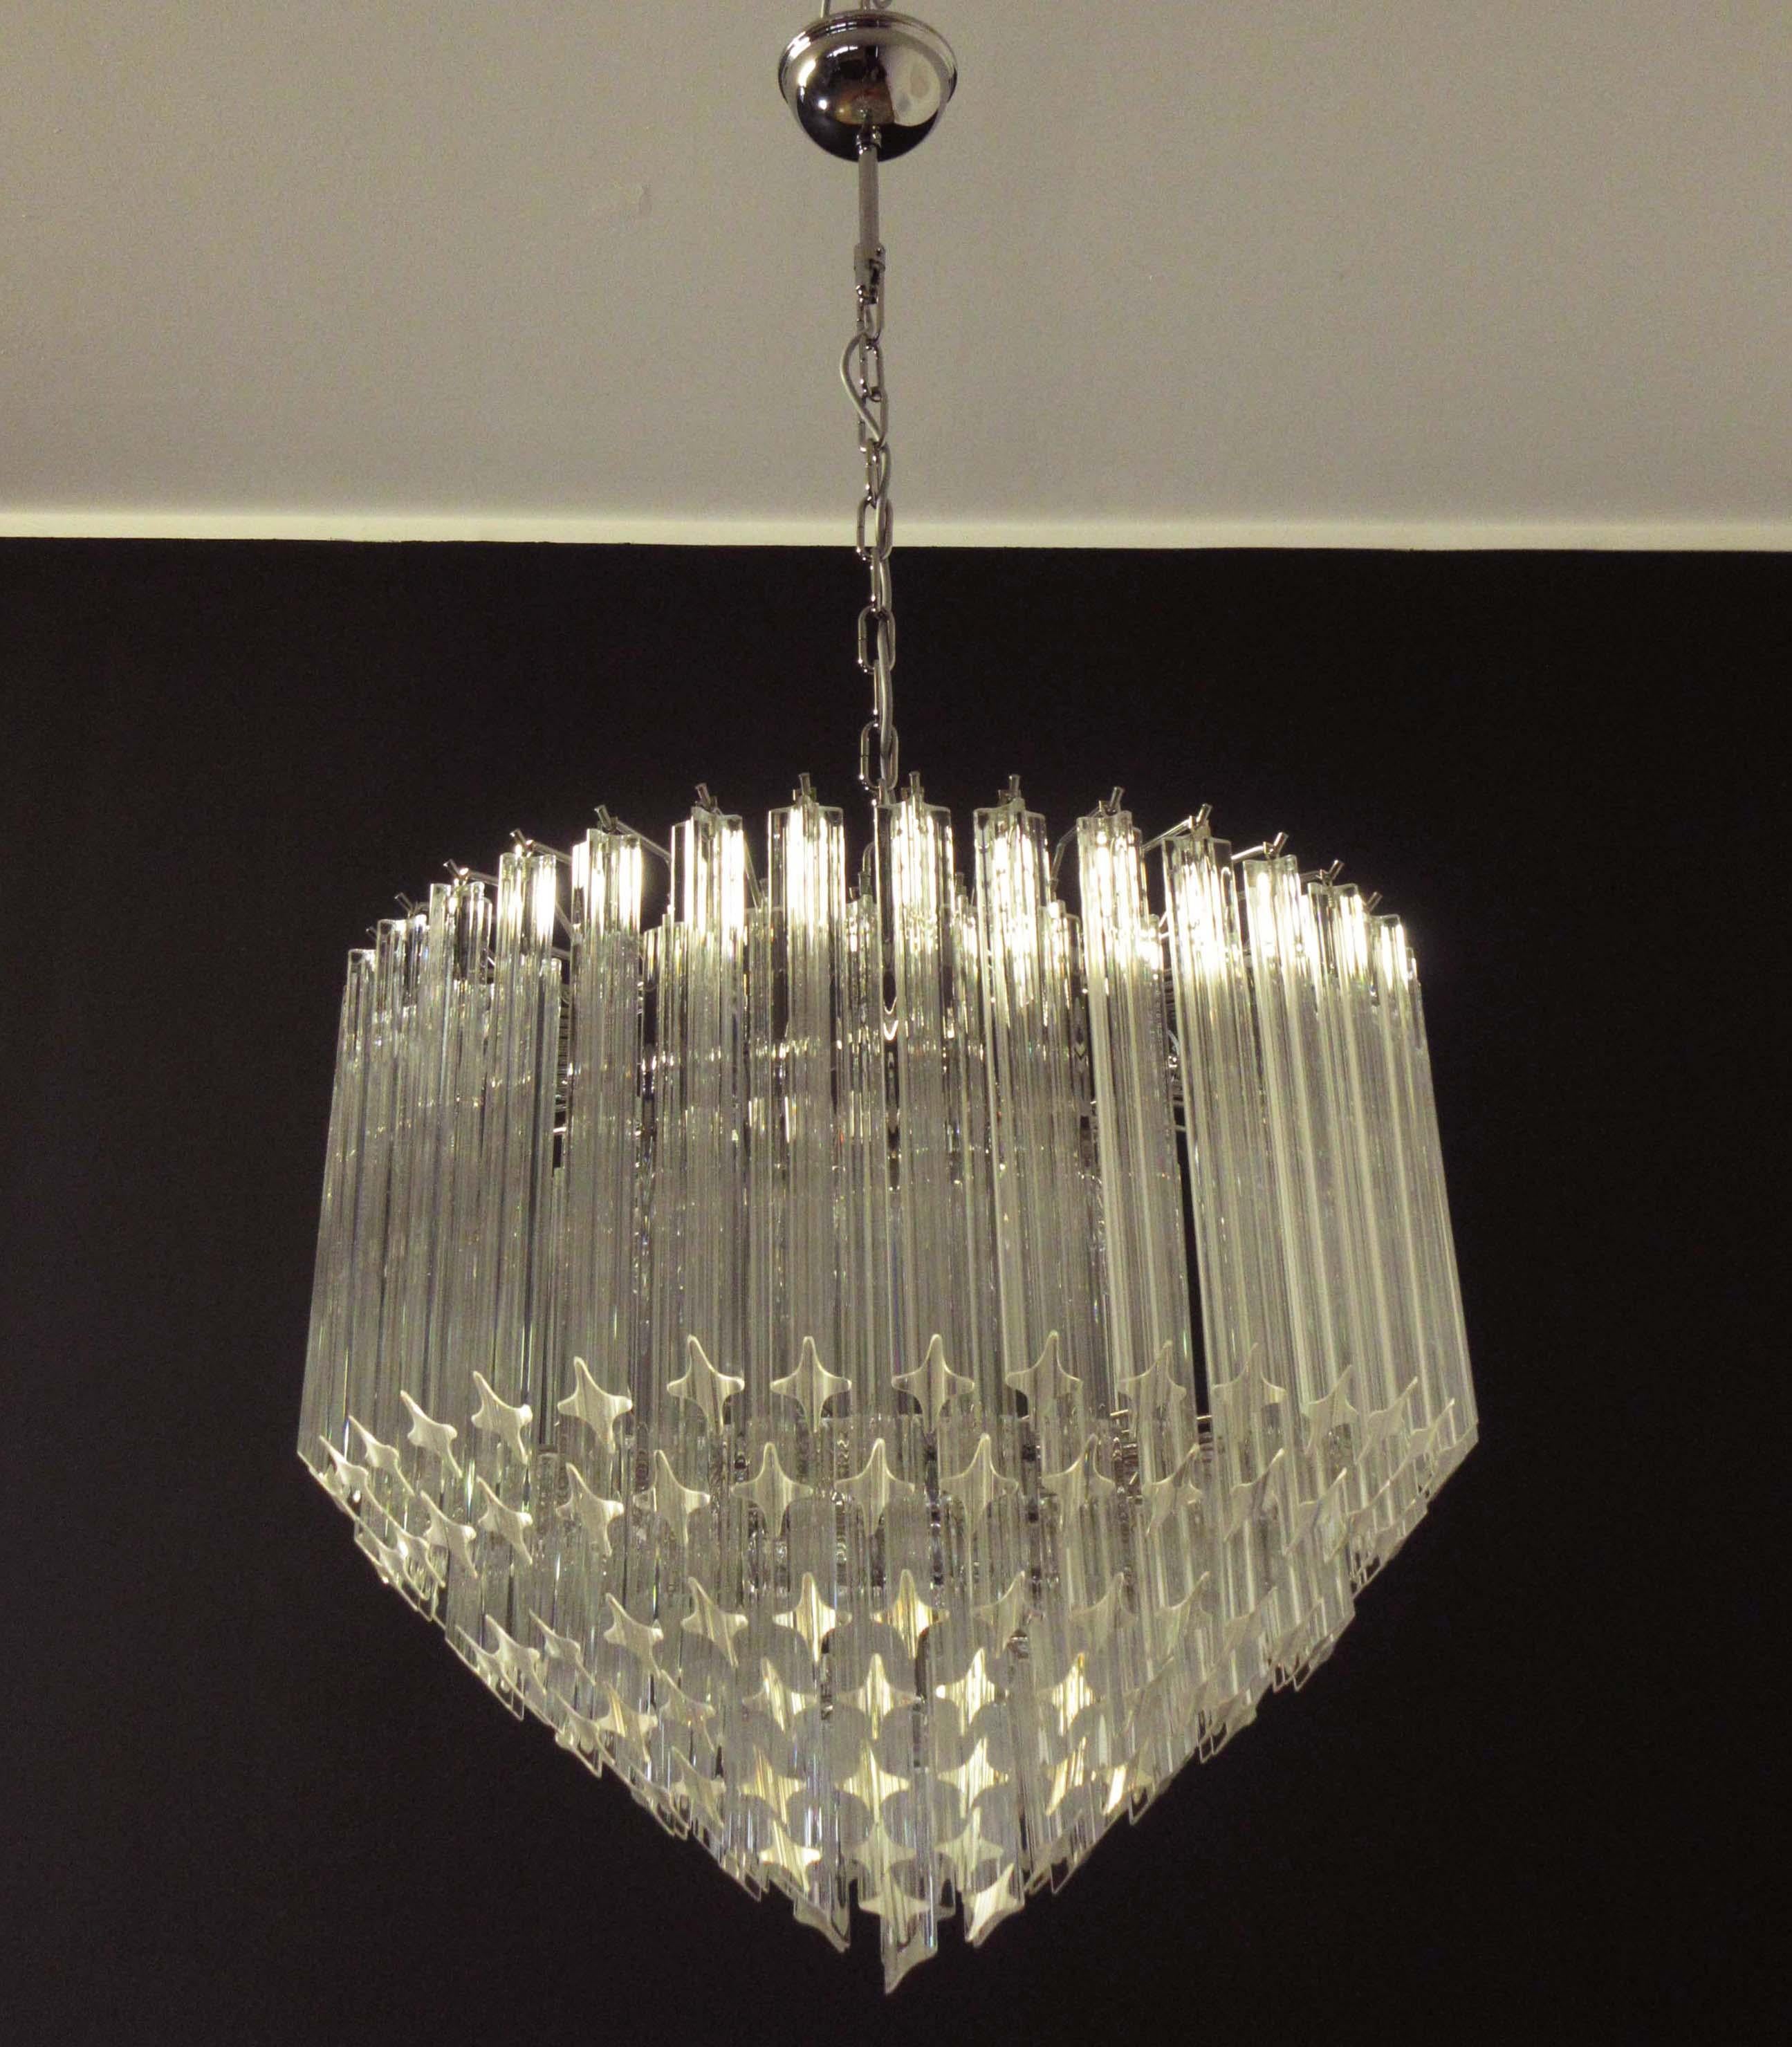 A magnificent Murano glass chandelier, 163 quadriedri on nickel metal frame. This large midcentury Italian chandelier is truly a timeless classic.
Period: late 20th century
Dimensions: 47.20 inches (120 cm) height with chain; 25.60 inches (65 cm)